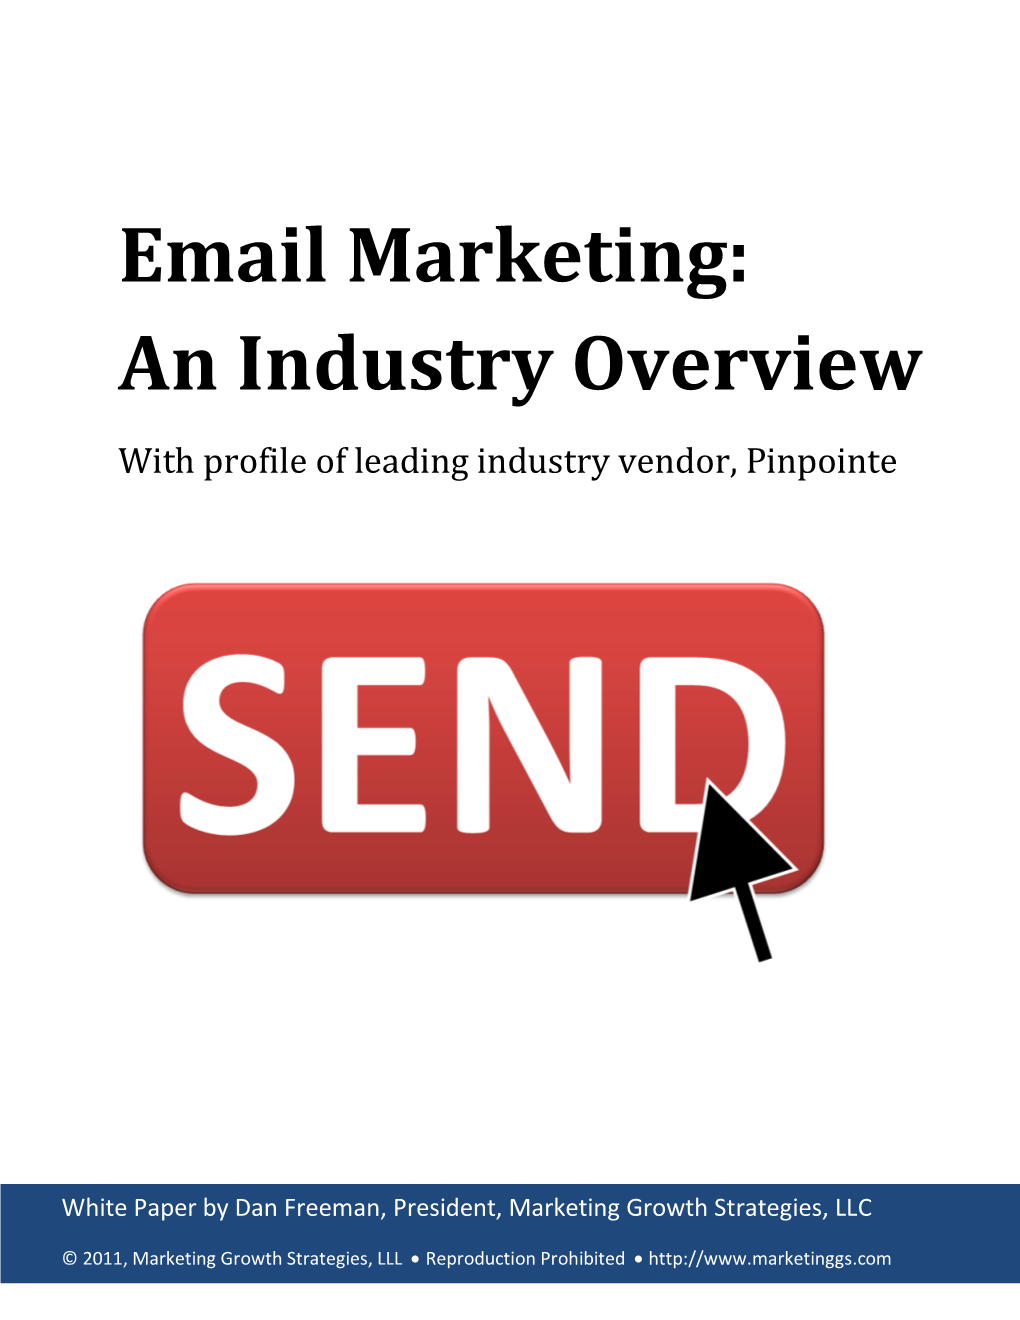 Email Marketing: an Industry Overview